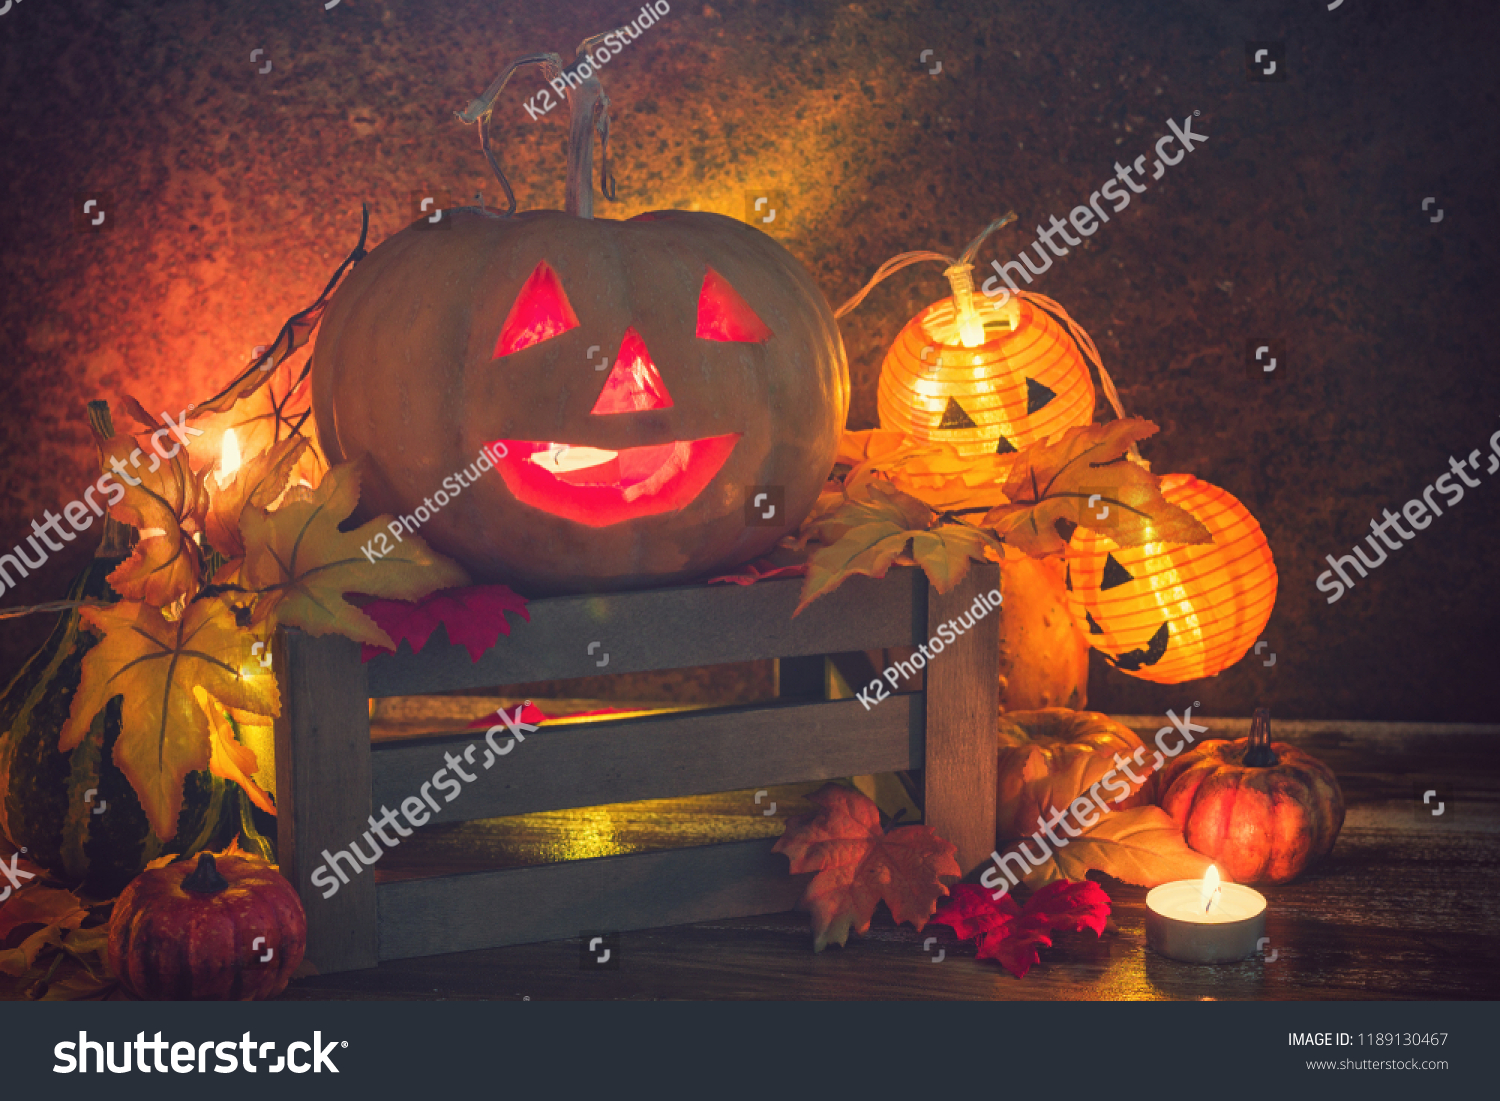 Jack O’ Lanterns glowing on the old rustic background #1189130467